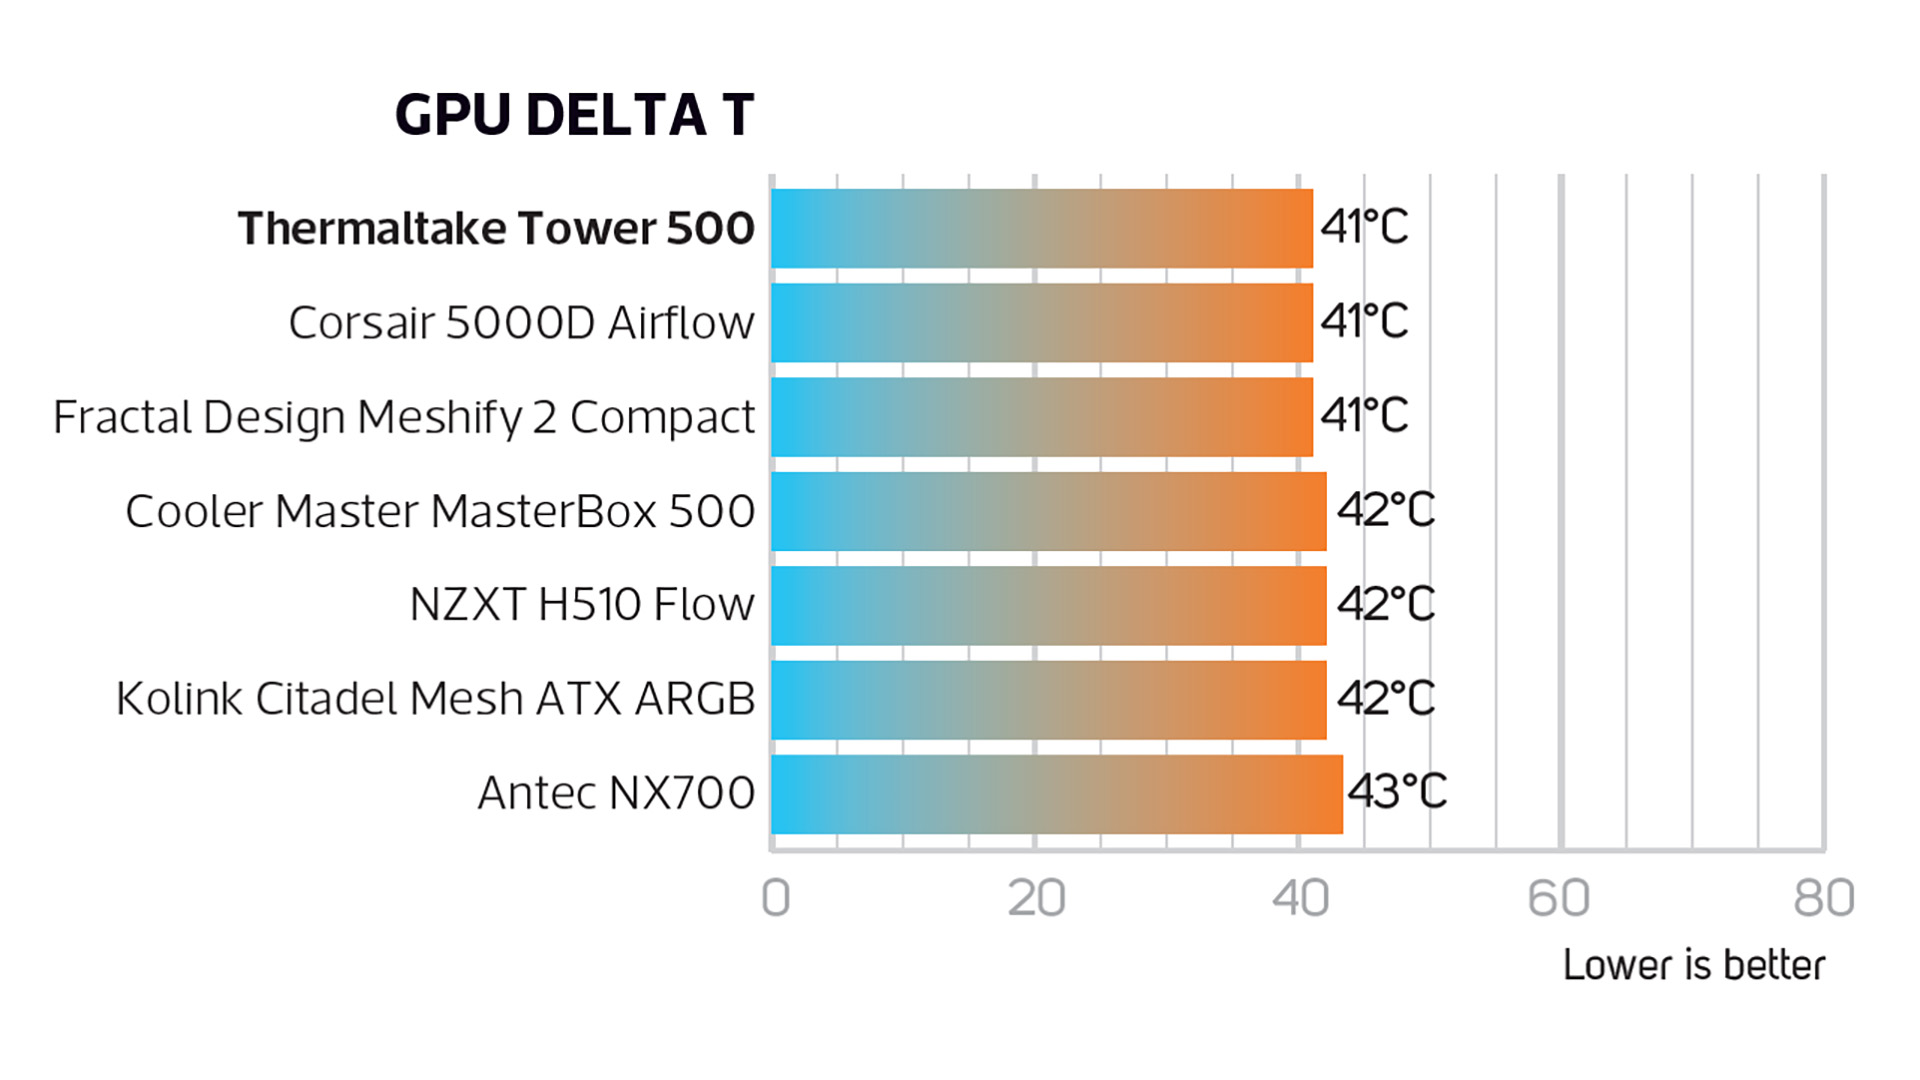 Thermaltake Tower 500 review image showing the GPU temperature results compared to other models. It reads 41 degrees, which is the joint lowest temperature.